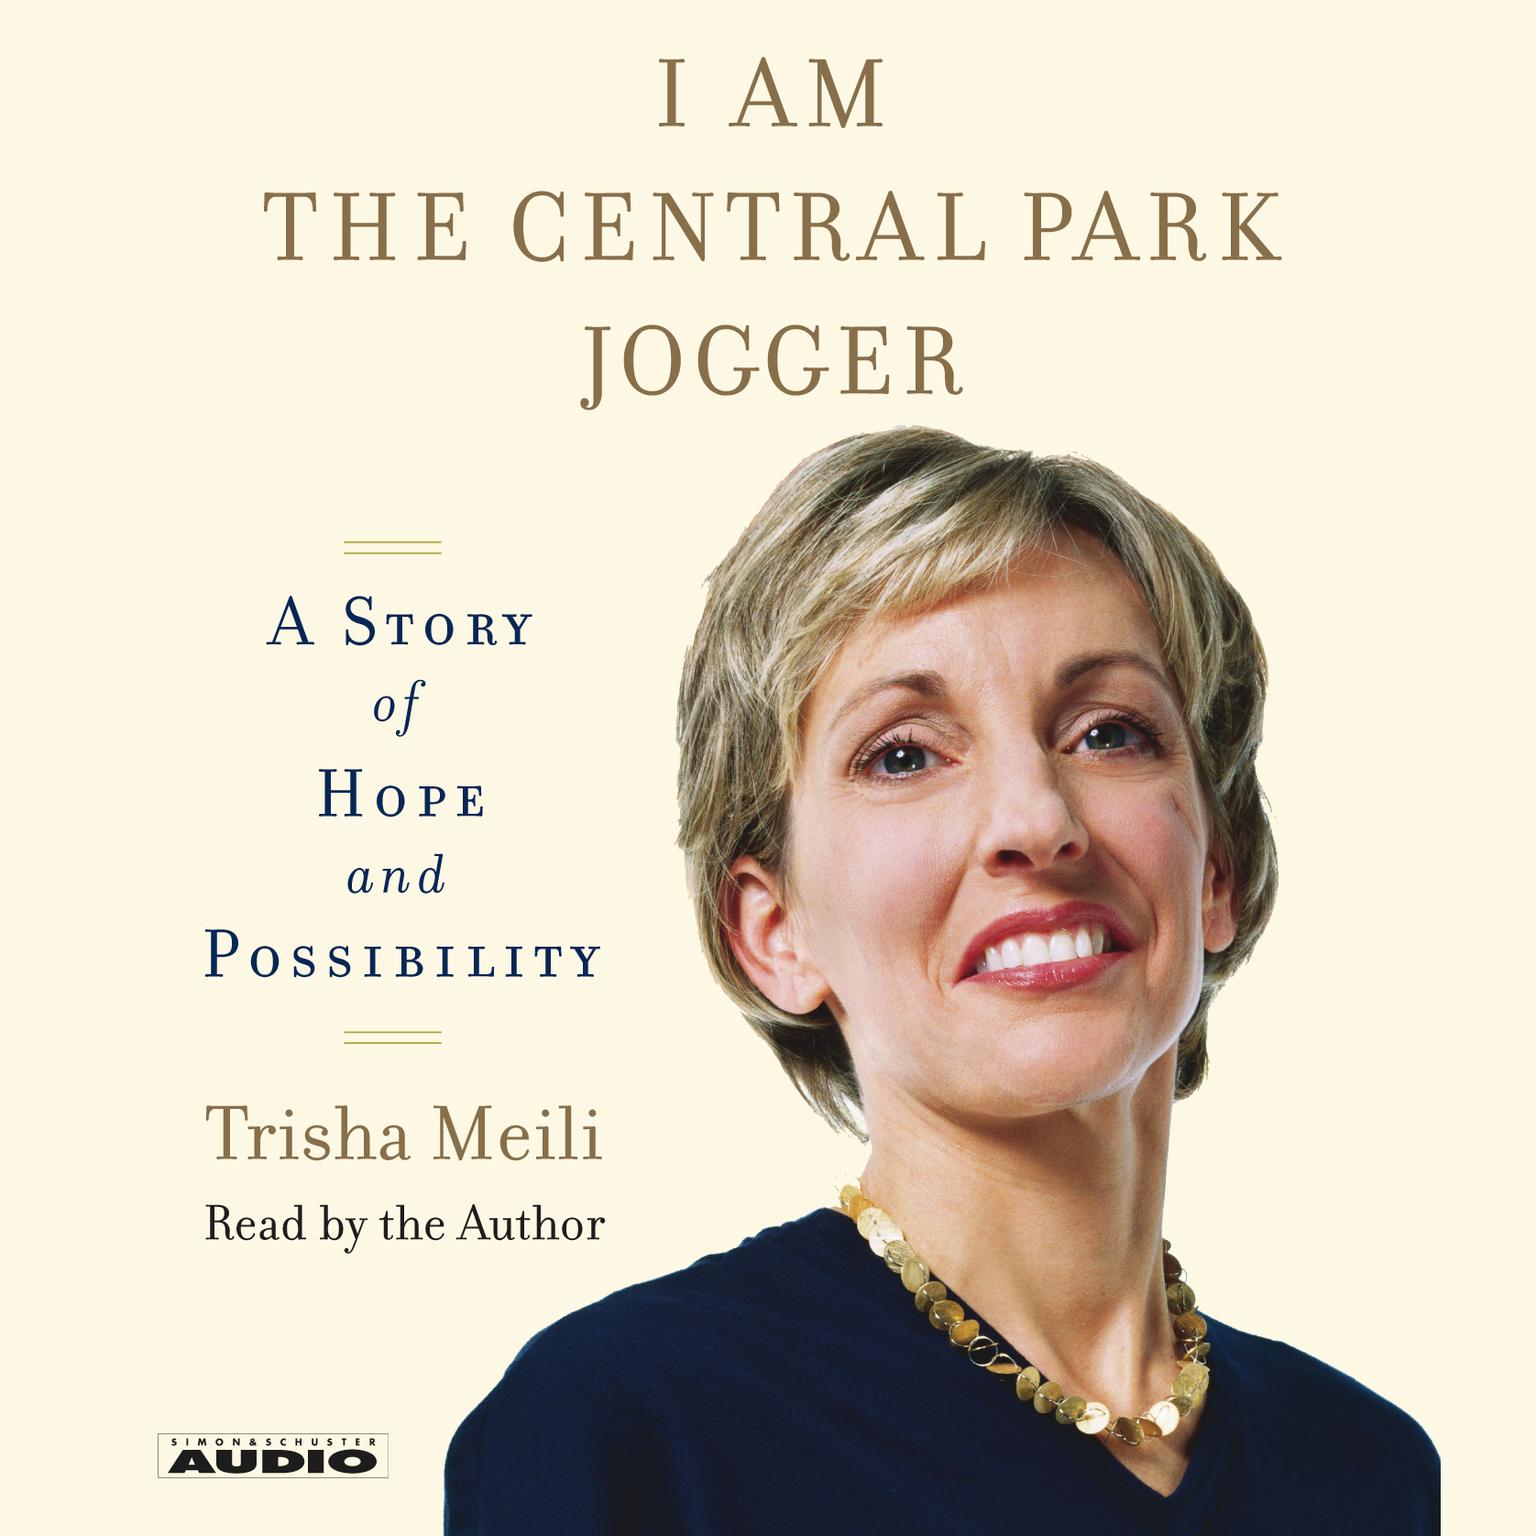 I Am the Central Park Jogger (Abridged): A Story of Hope and Possibility Audiobook, by Trisha Meili